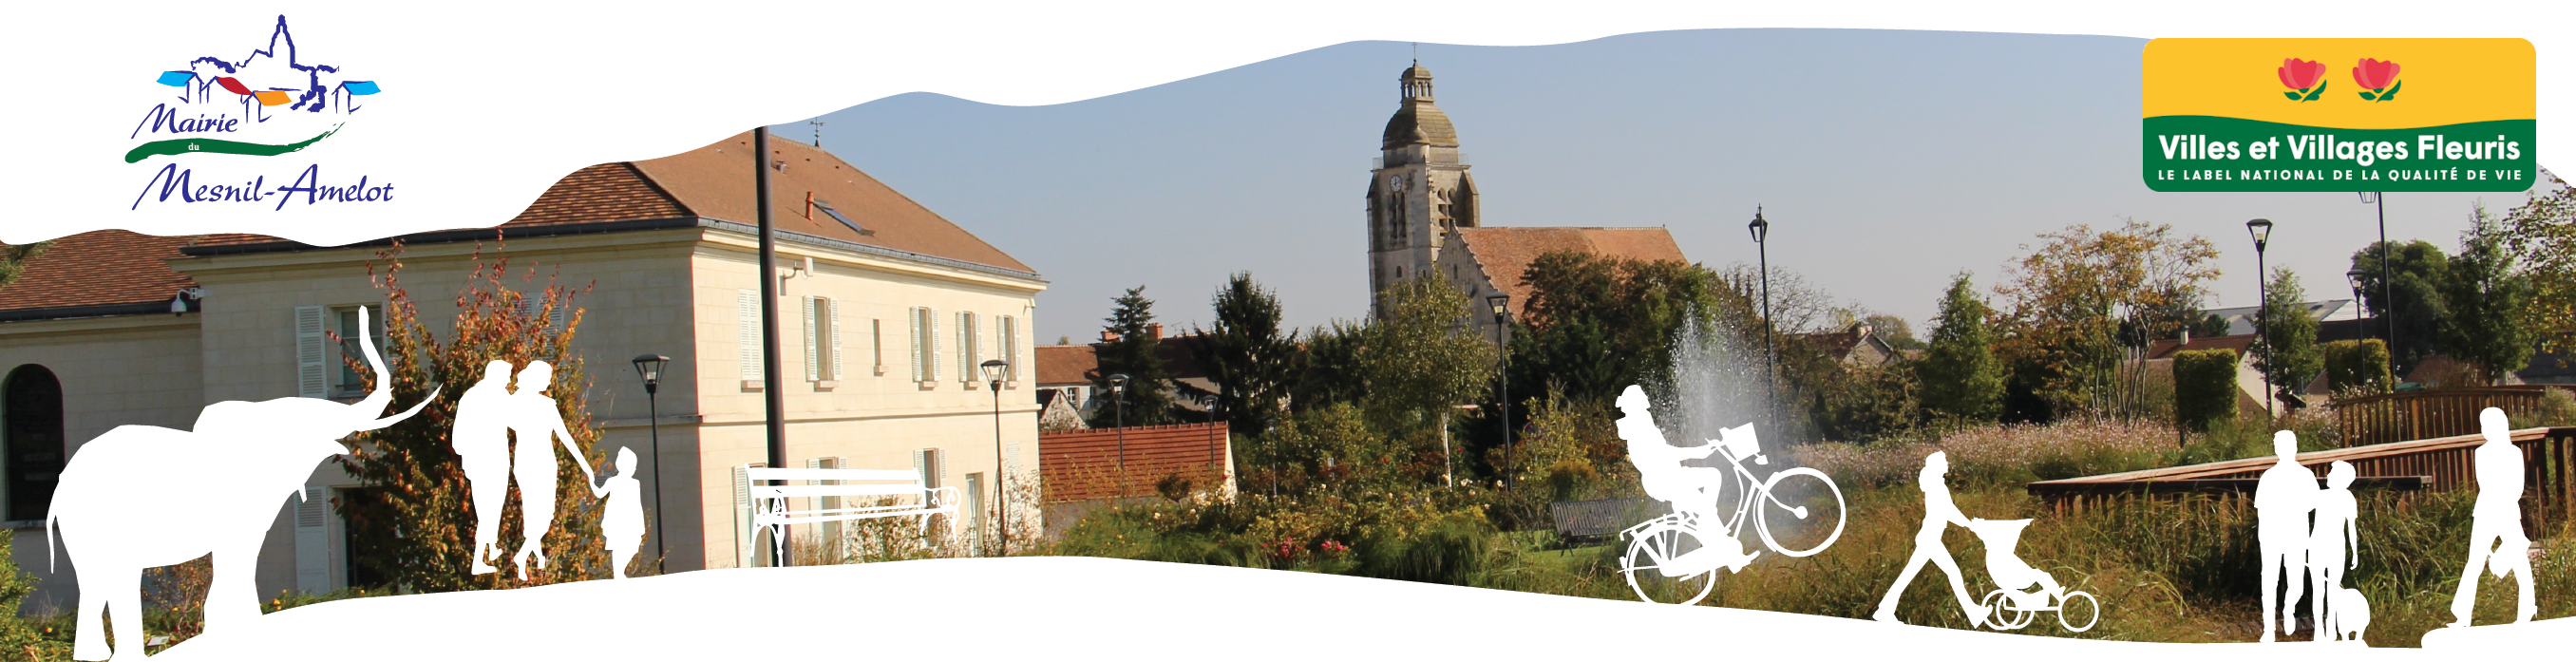 Mairie Le Mesnil-Amelot